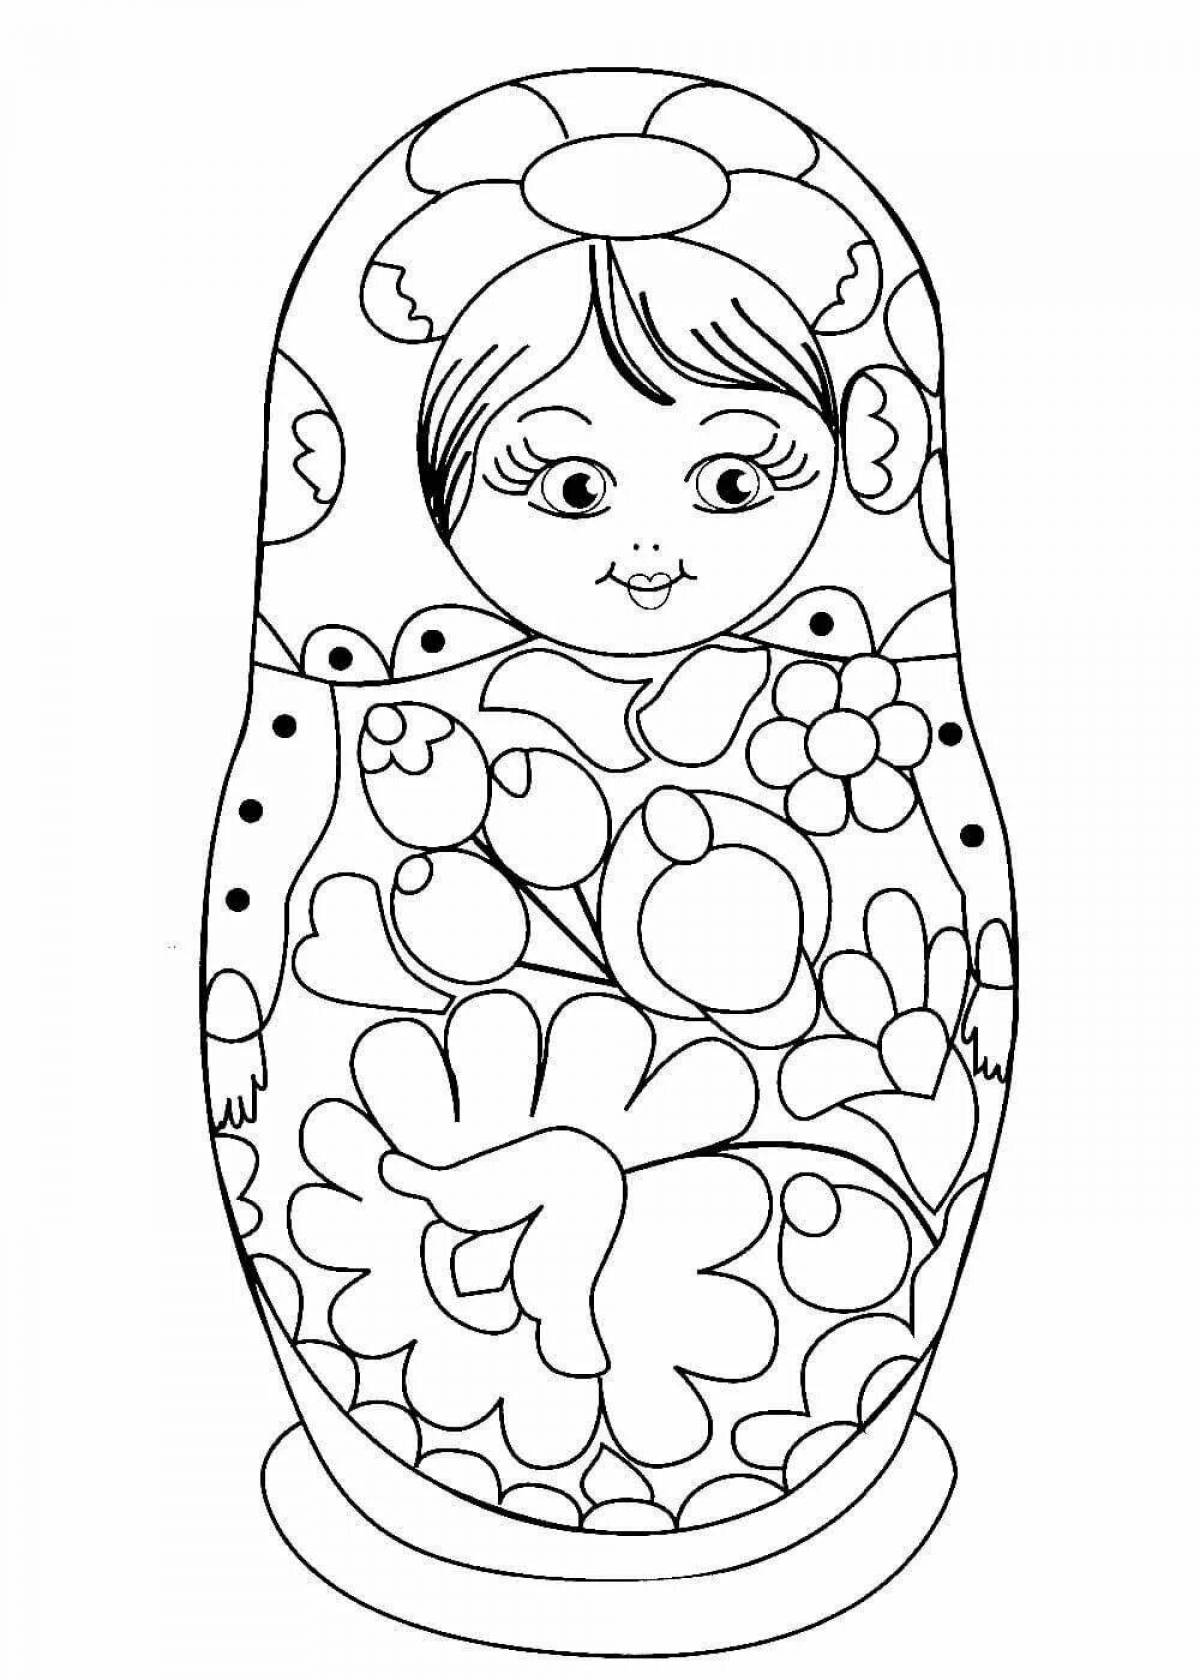 Creative nesting doll coloring template for kids